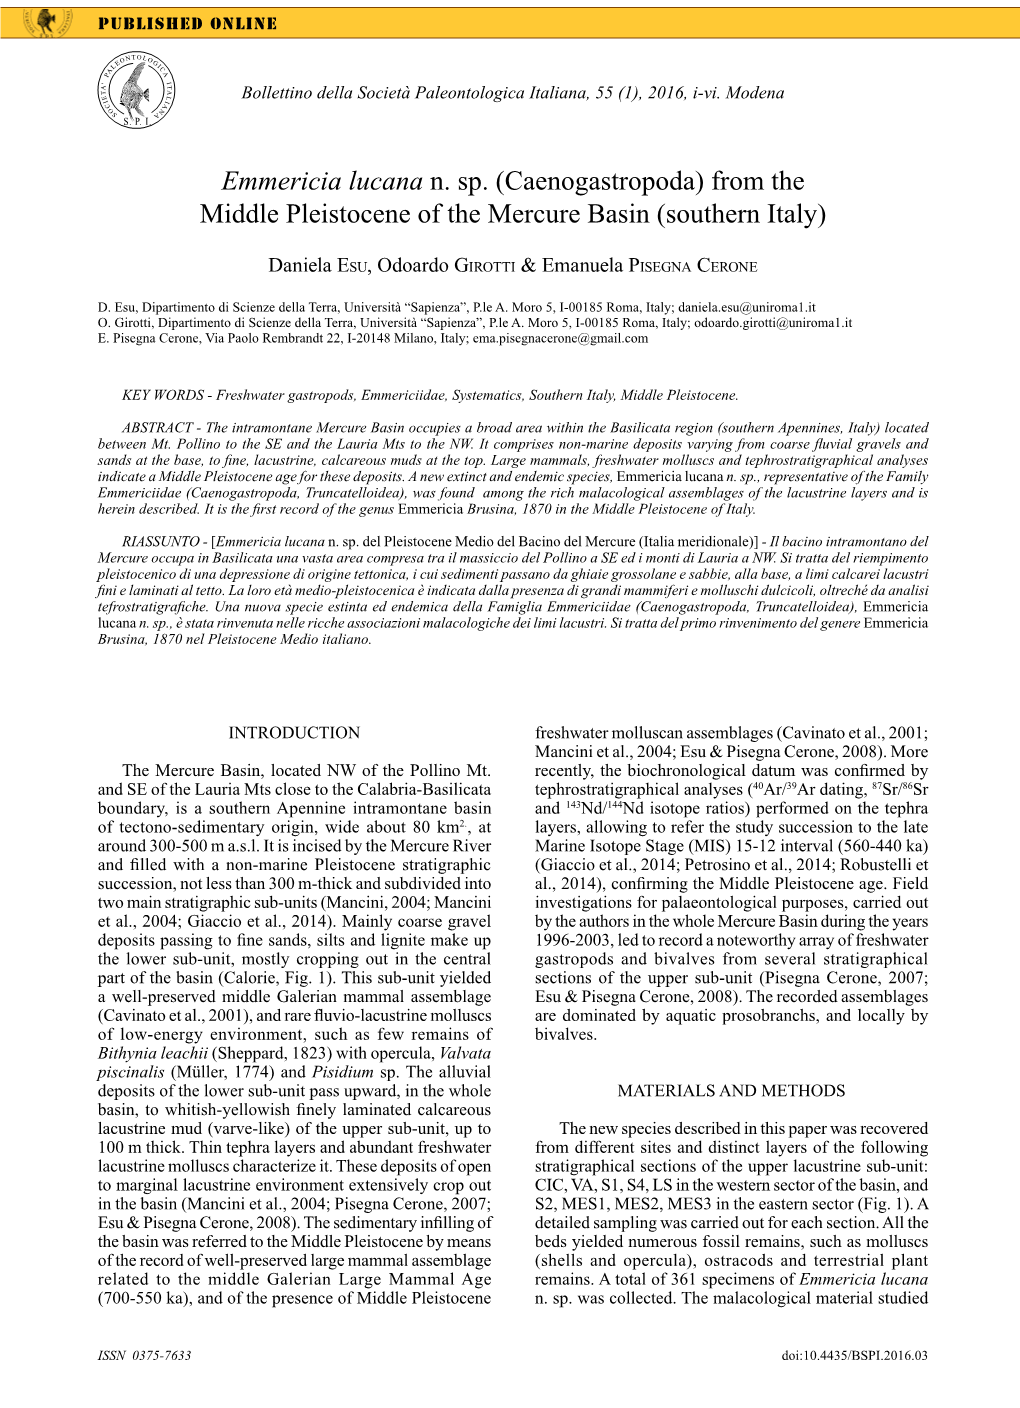 From the Middle Pleistocene of the Mercure Basin (Southern Italy)